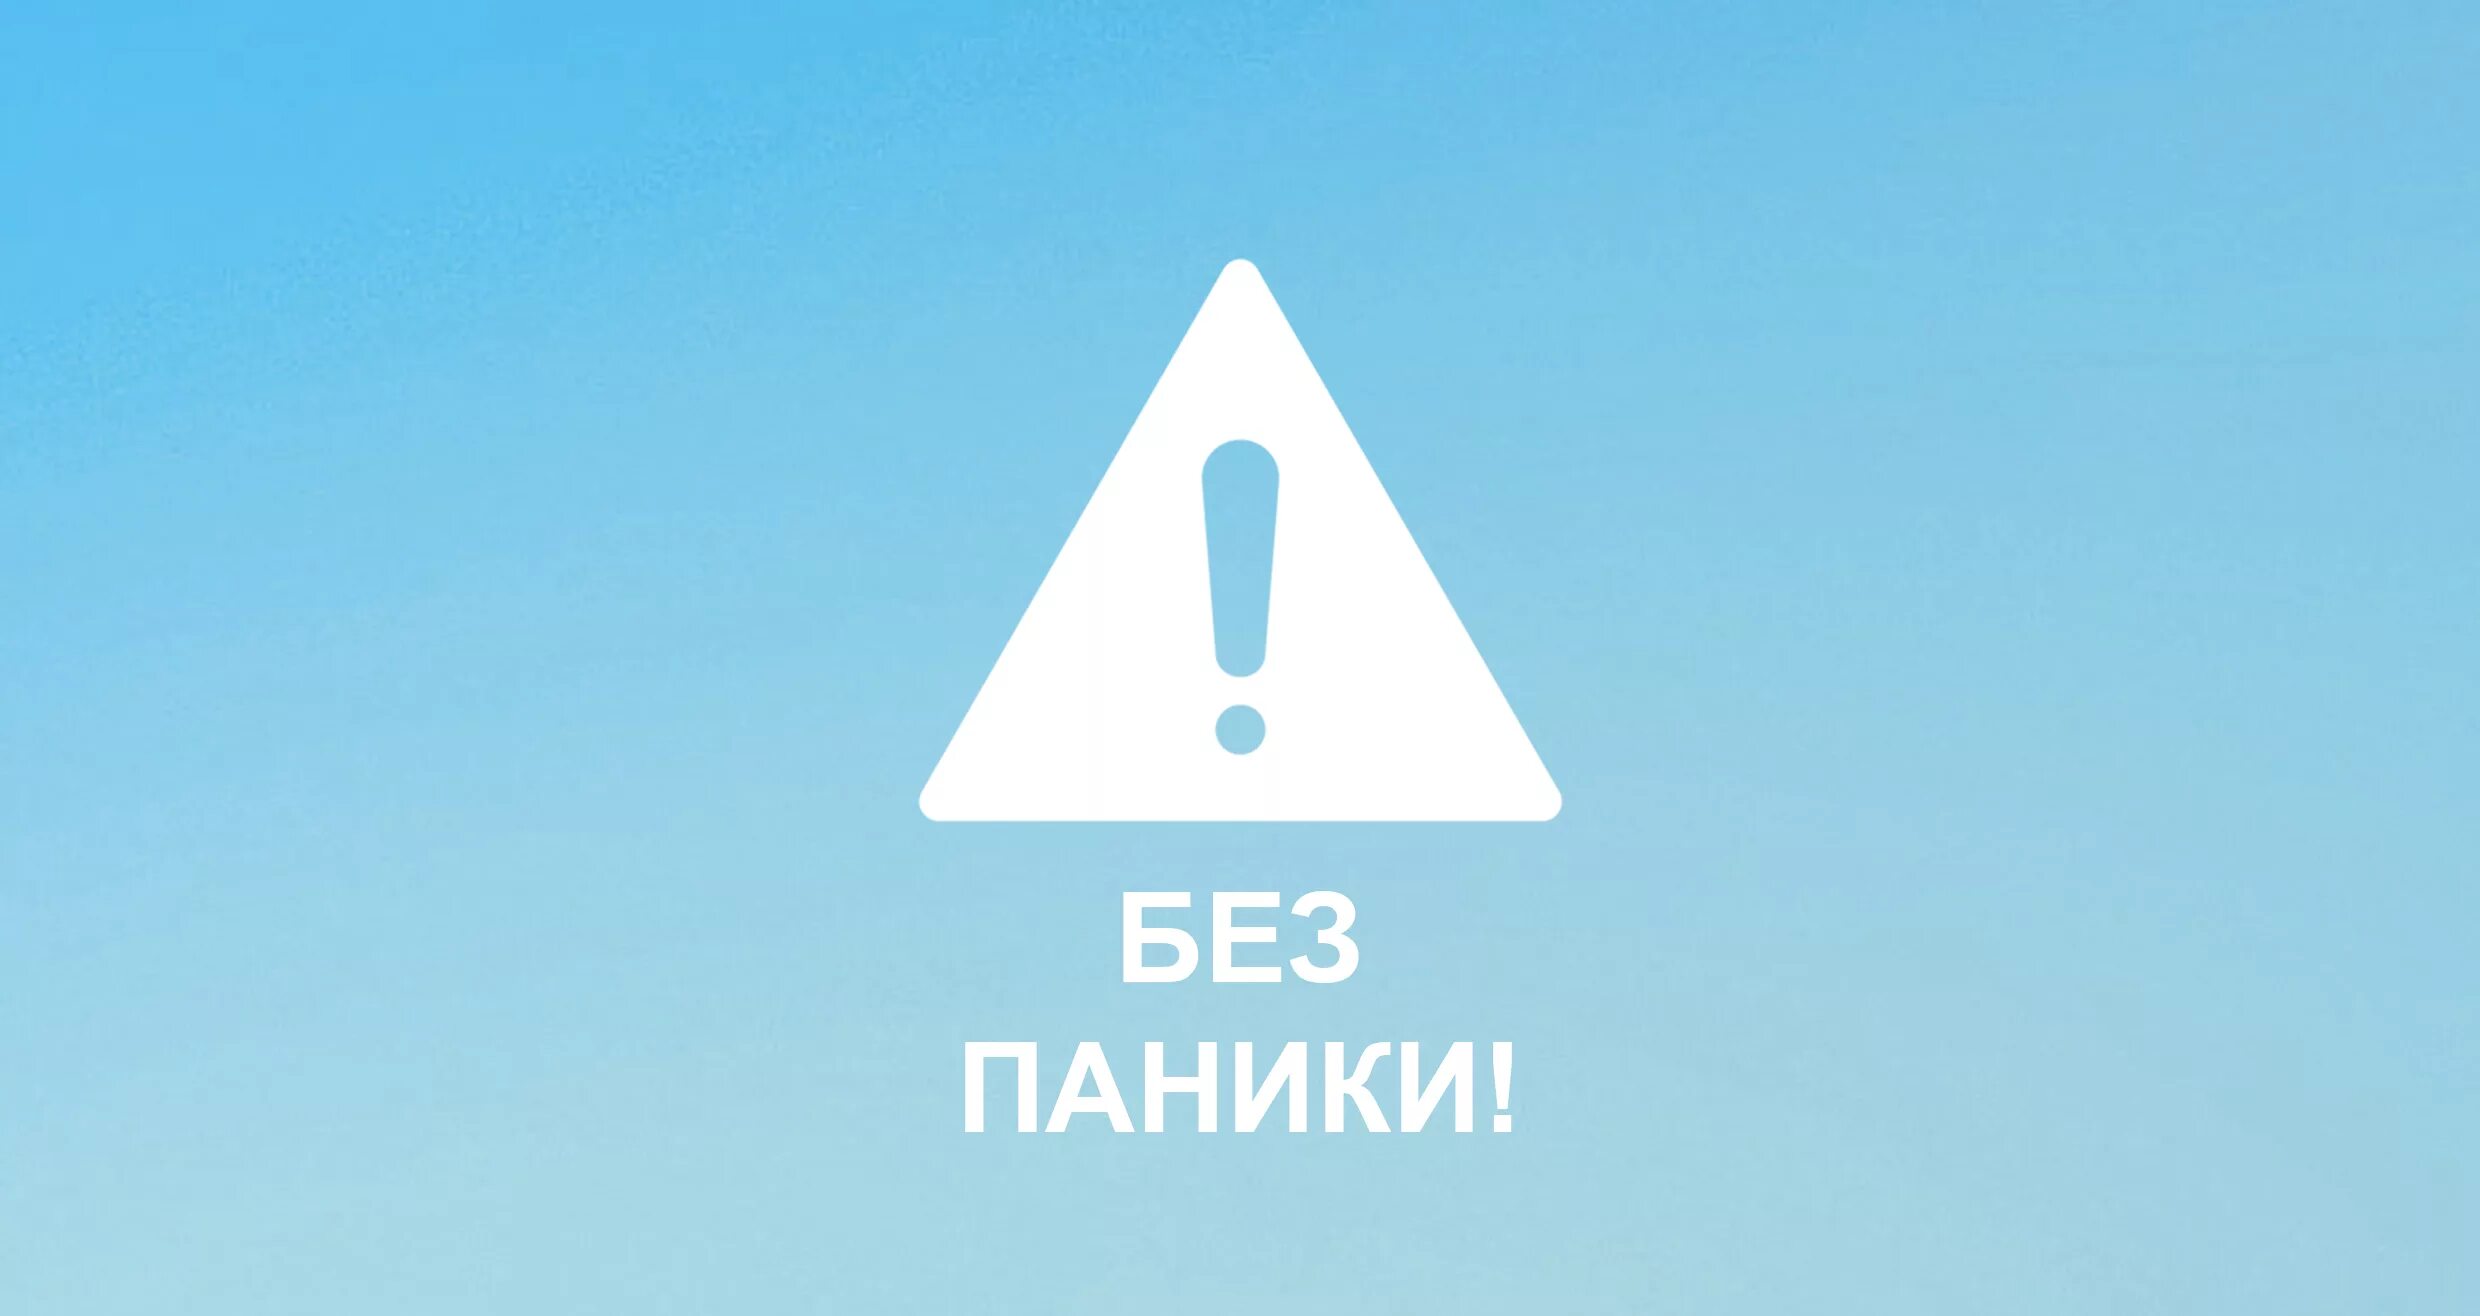 An Error has occurred while Updating the device software. Ошибка an Error occurred. An Error has occurred while Updating the device software. Use the Emergency Recovery function in the Smart Switch PC software.. An Error has occurred while Updating the device software use the Emergency Recovery function in the.